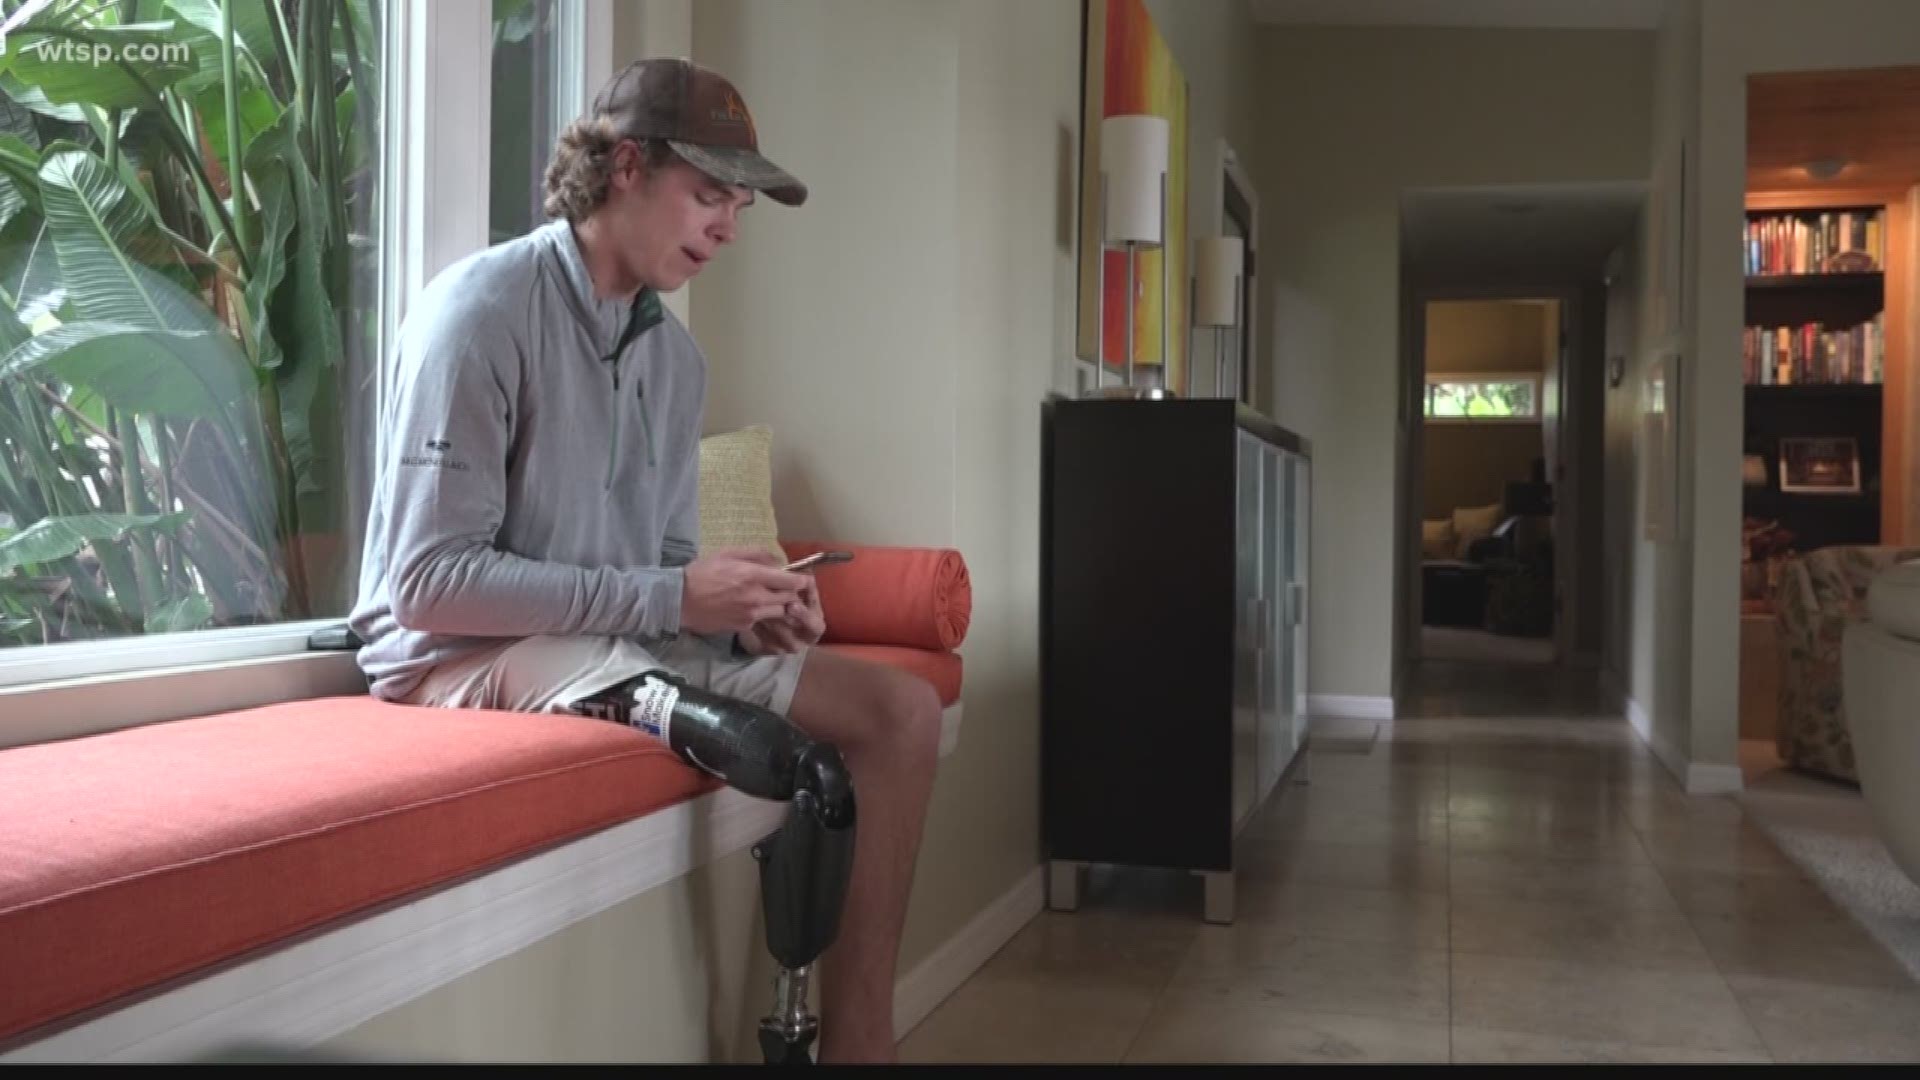 Inspired by a chance meeting, Jake Bainter helps kids adapt to life with a prosthetic limb.